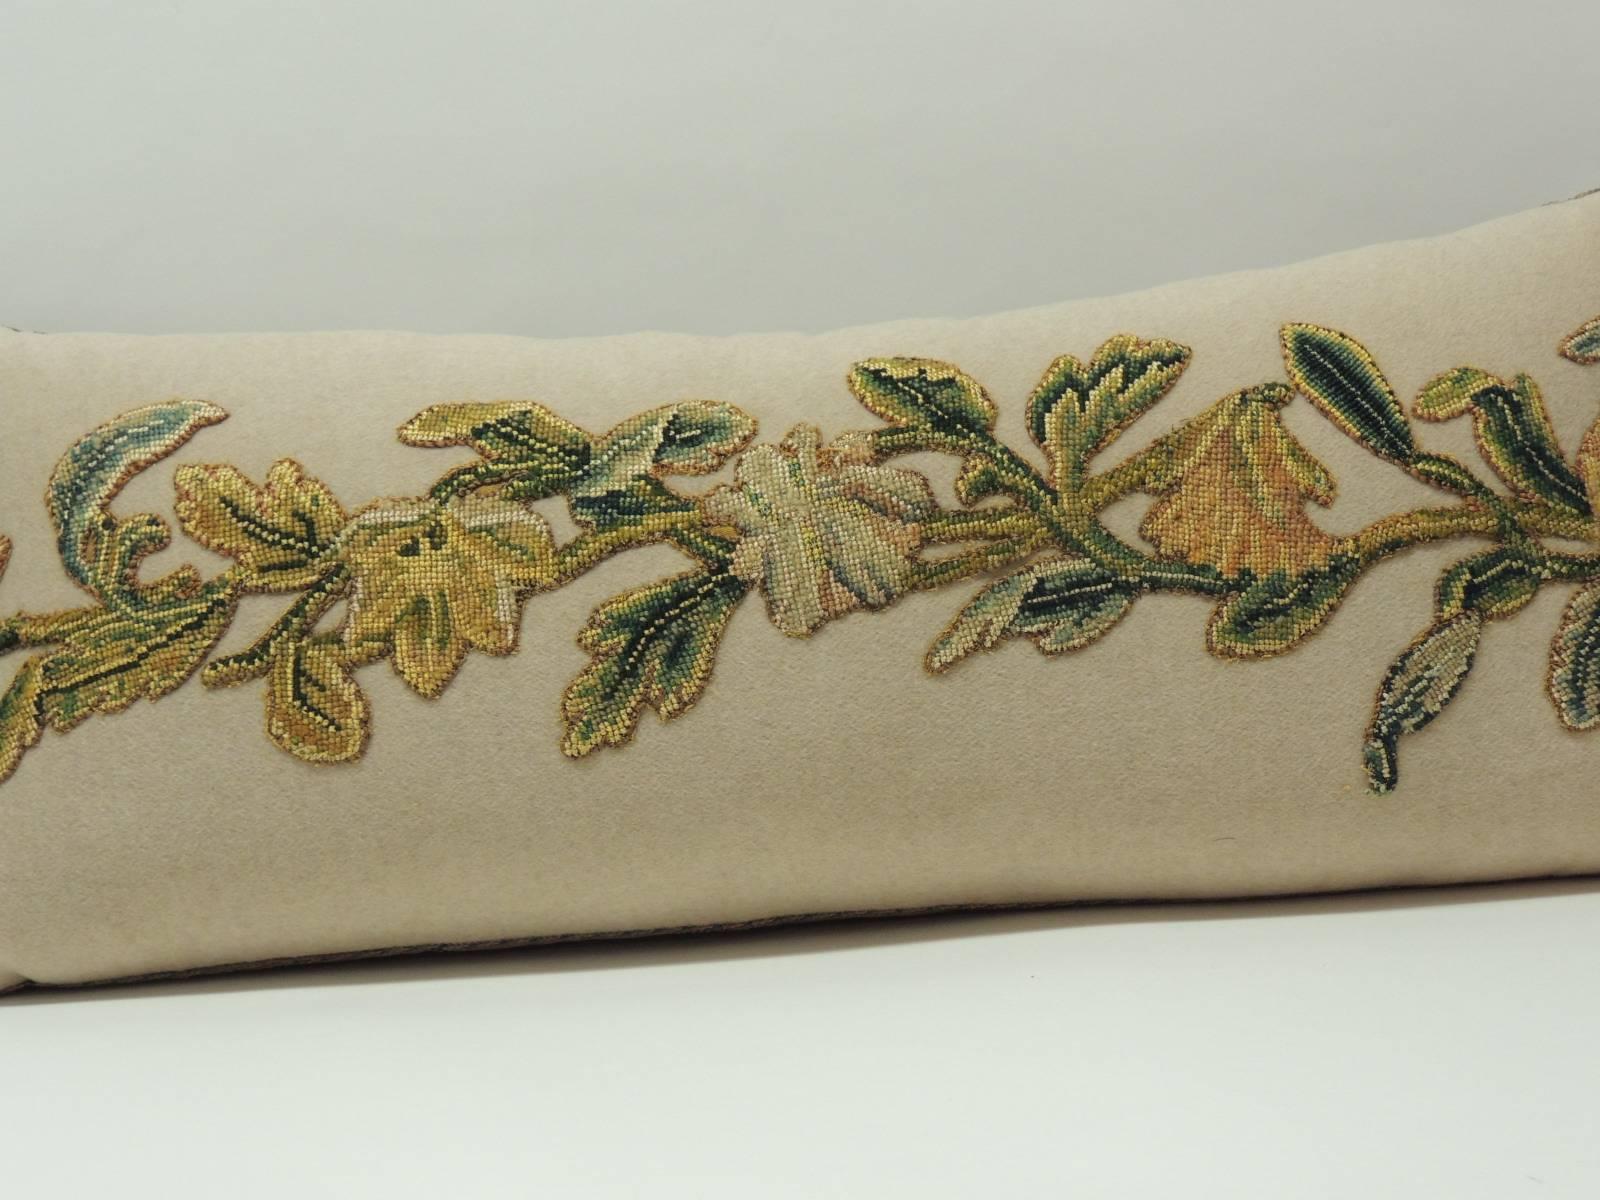 19th century applique wool-on-wool embroidery long bolster “one-of-a-kind” decorative pillow with taupe color wool in the front panel where the embroidery has been applied and a tobacco silk velvet textile in the backing. The decorative long bolster